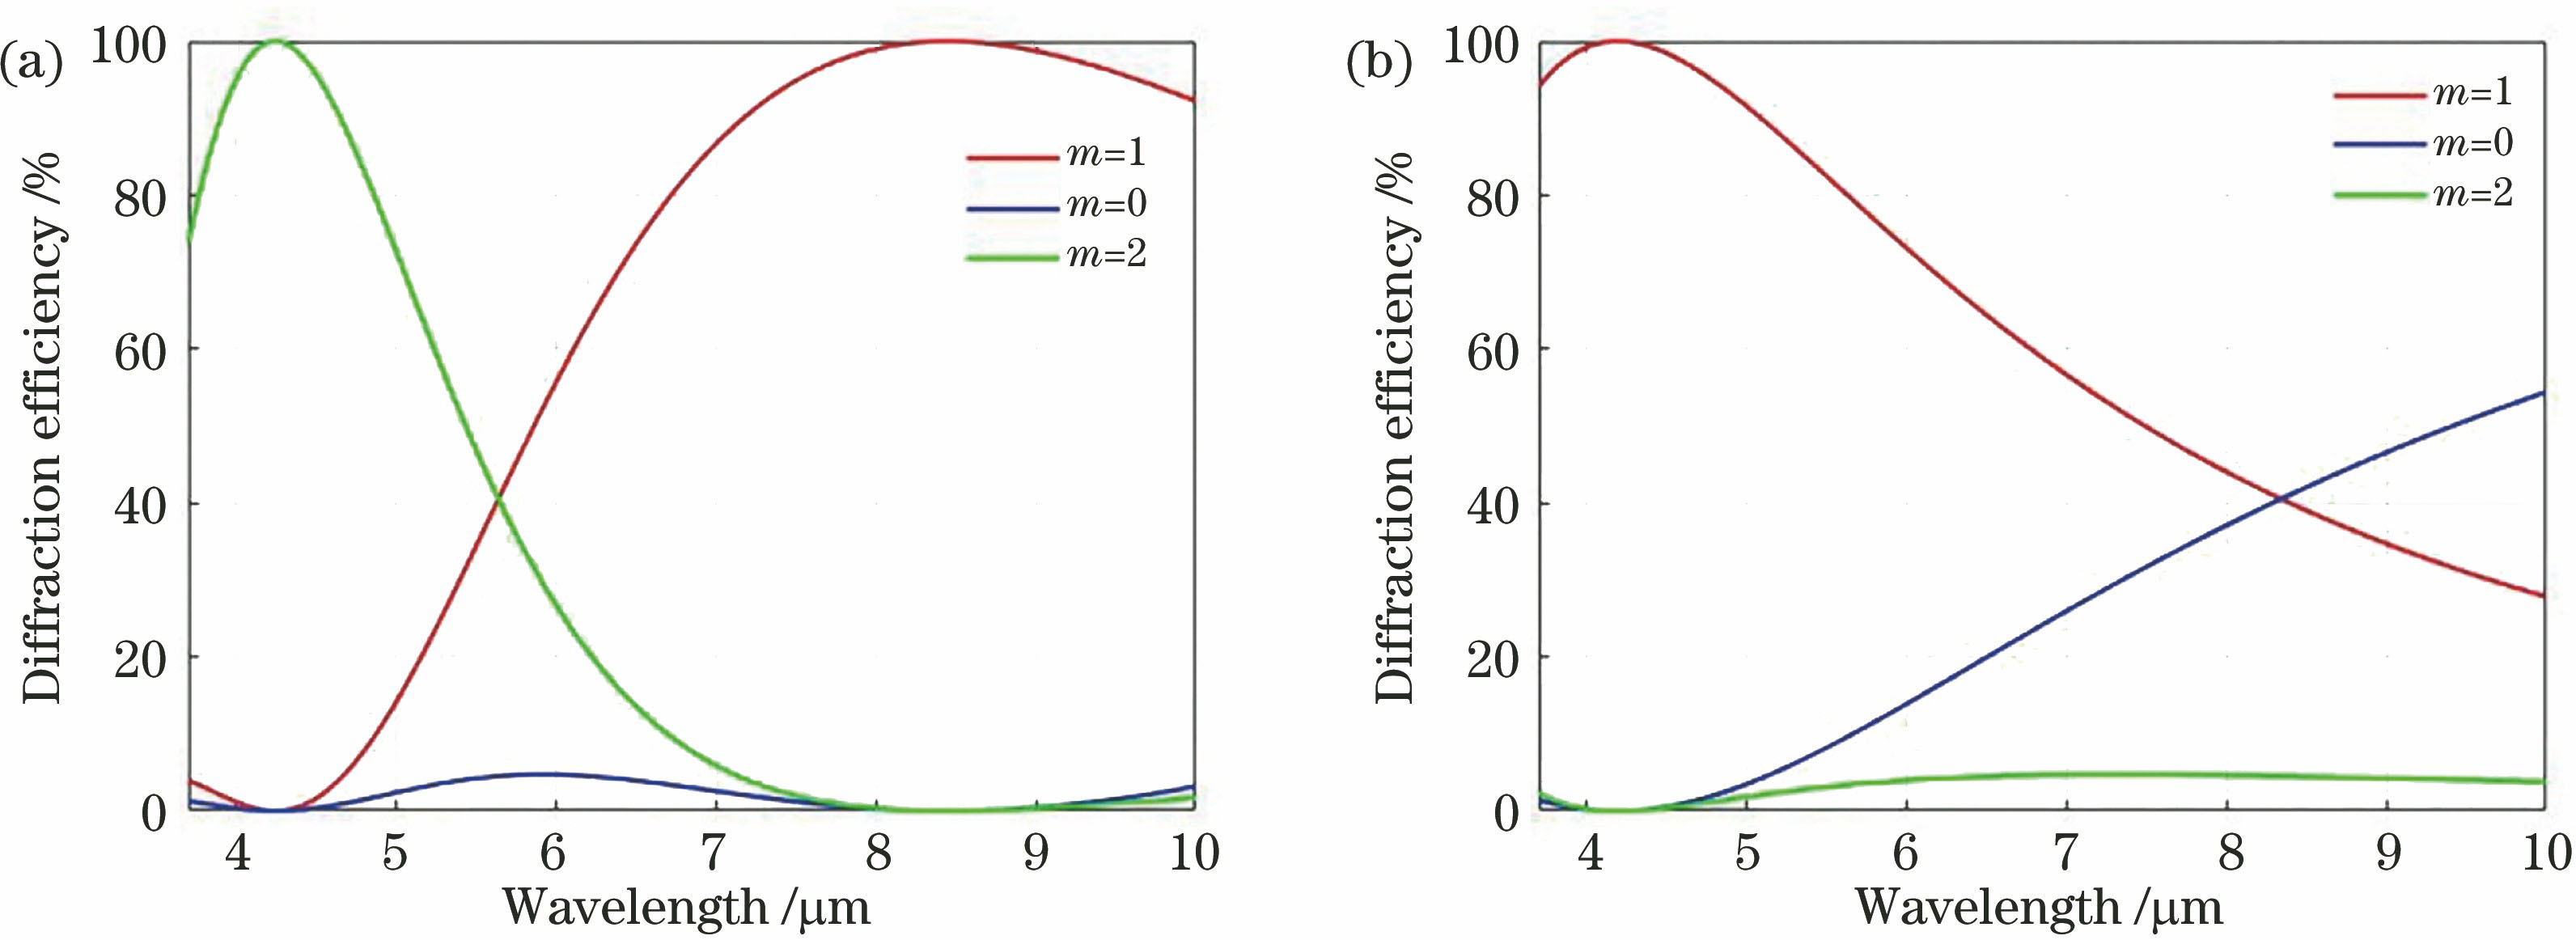 Diffraction efficiency. (a) When the center wavelength is in long waveband; (b) when the center wavelength is in medium waveband